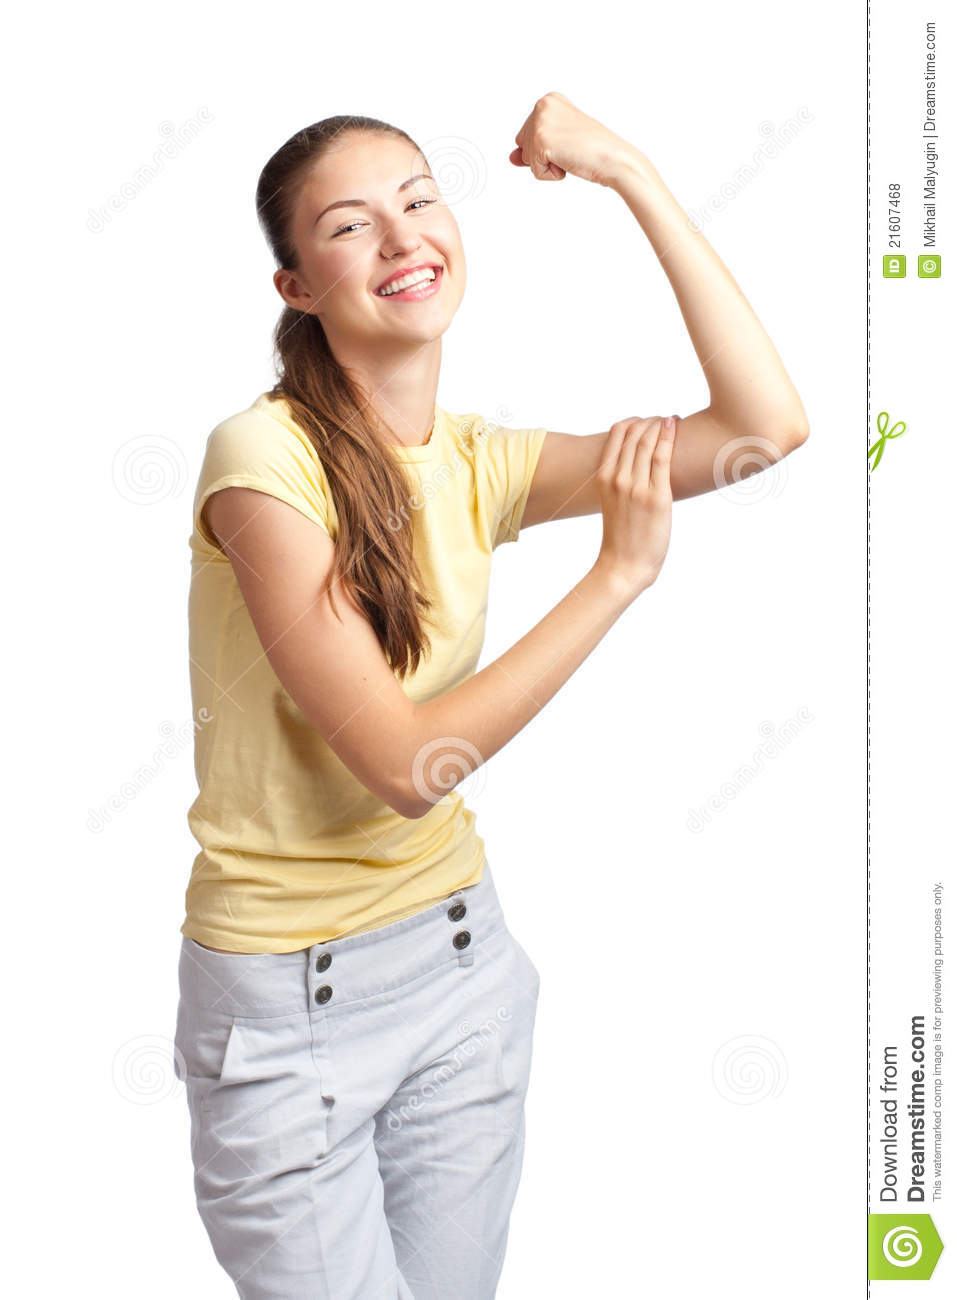 Portrait Of Cheerful Young Woman Flexing Her Biceps Isolated Over